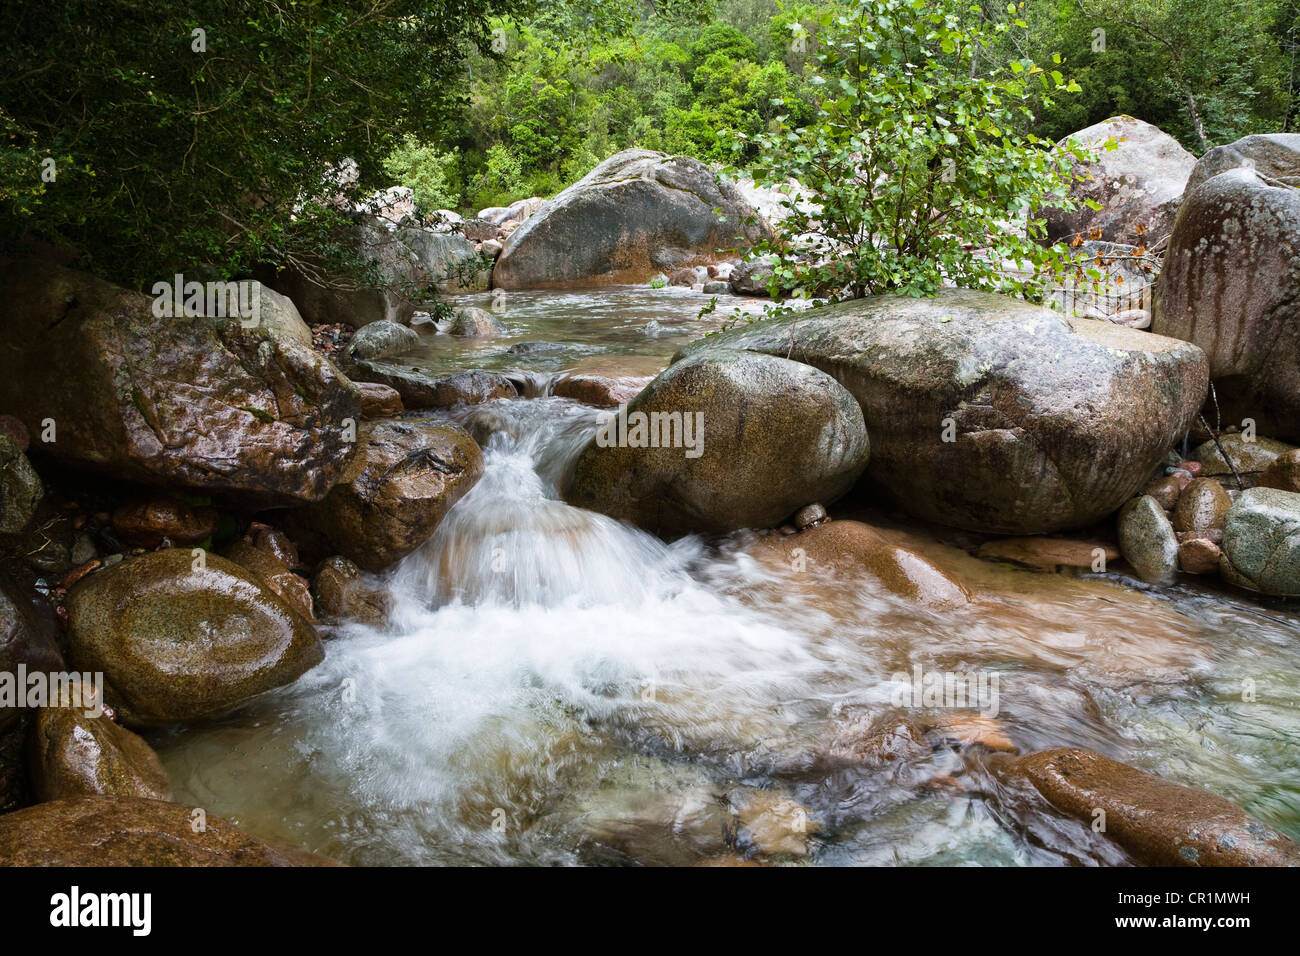 Colourful rocks in clear creek in the Spelunca Gorges, near the village of Ota, Corsica, France, Europe Stock Photo